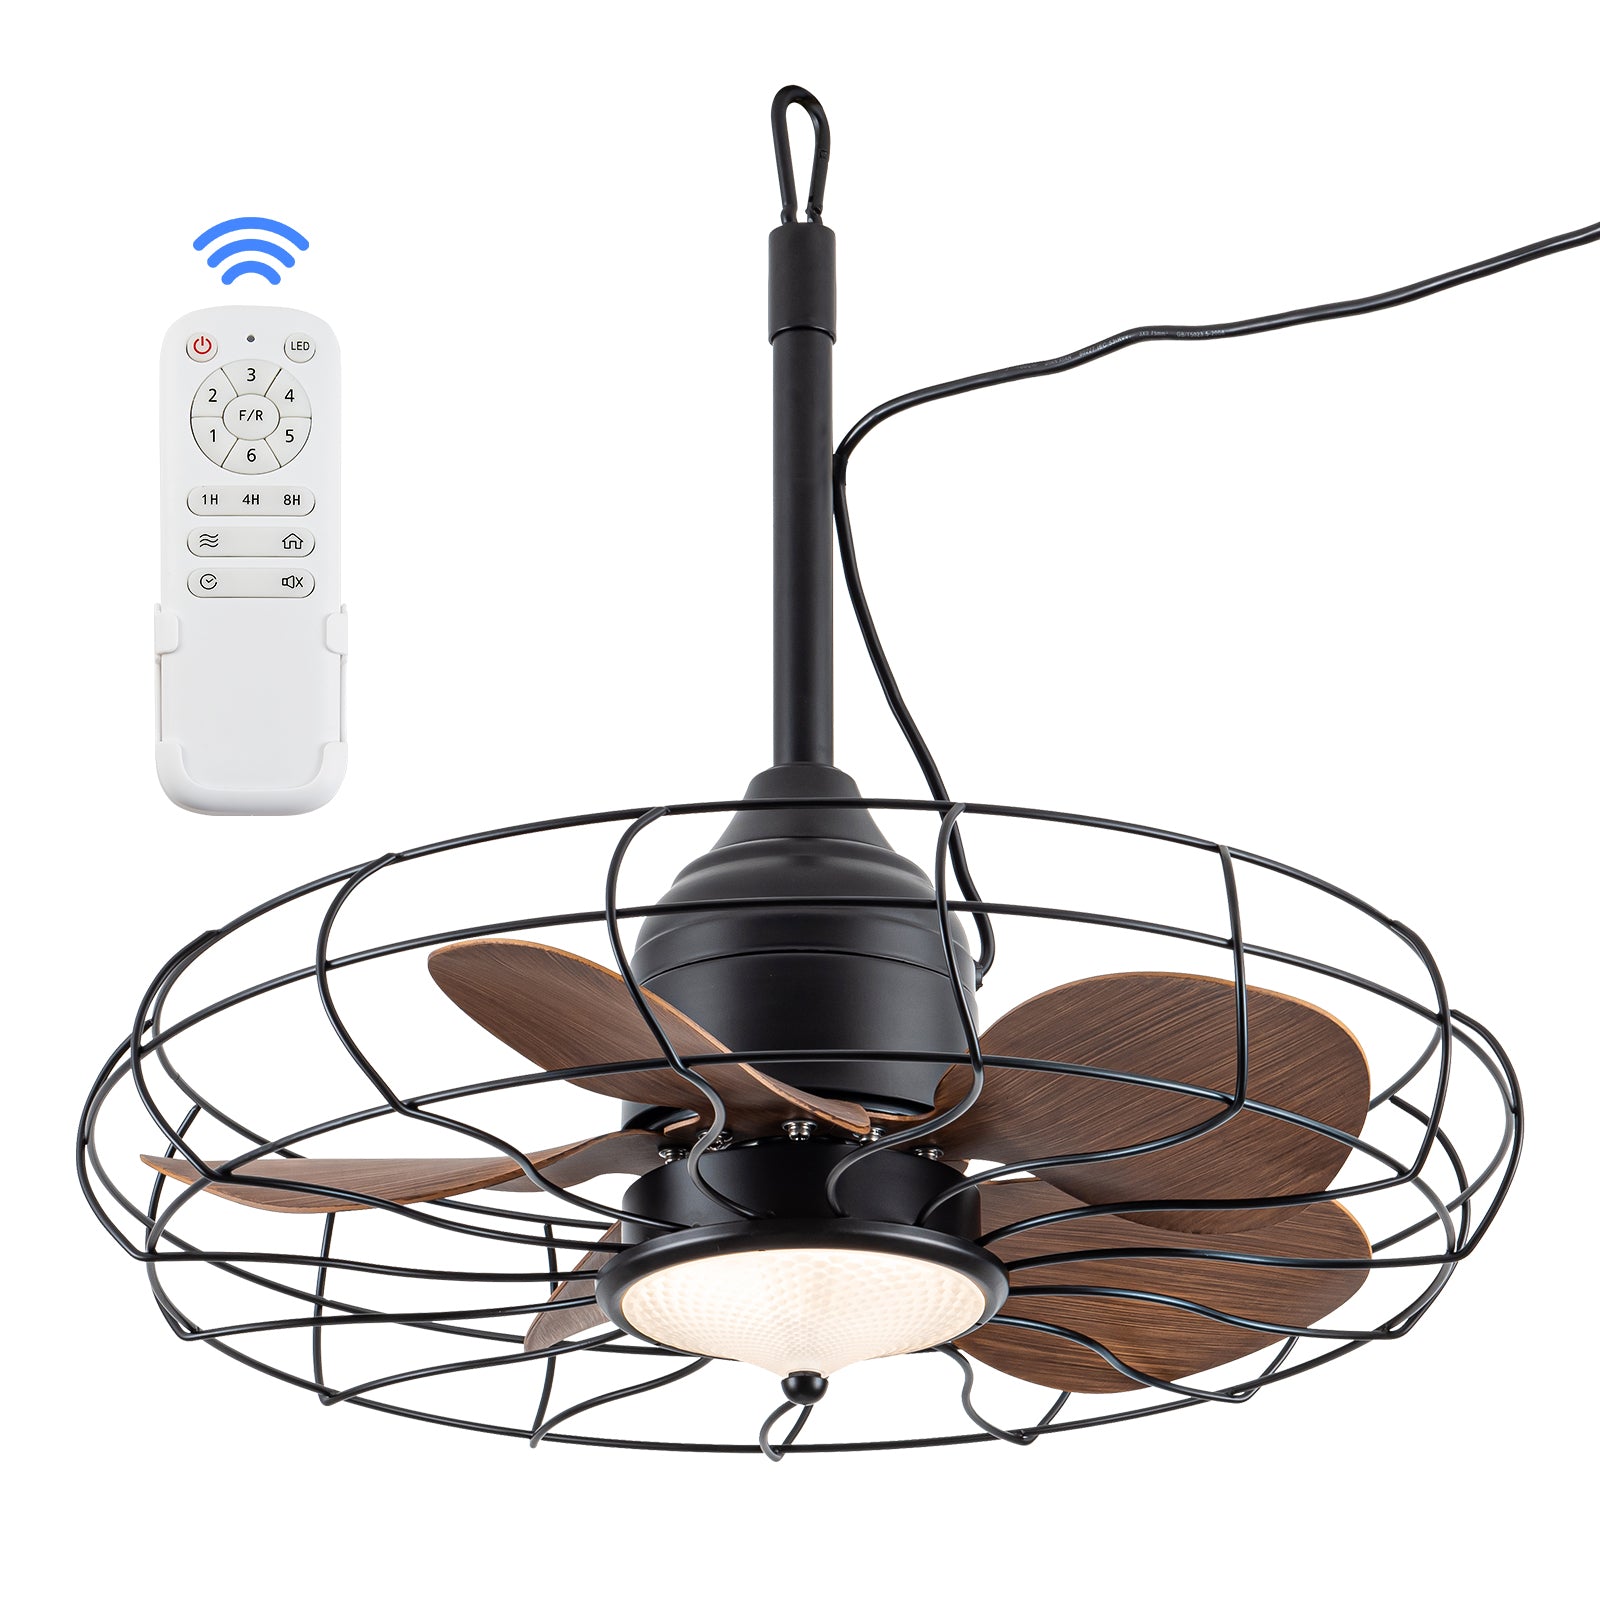 Norfolk 24 Wet Rated Outdoor Ceiling Fans With Light Norfolkfan